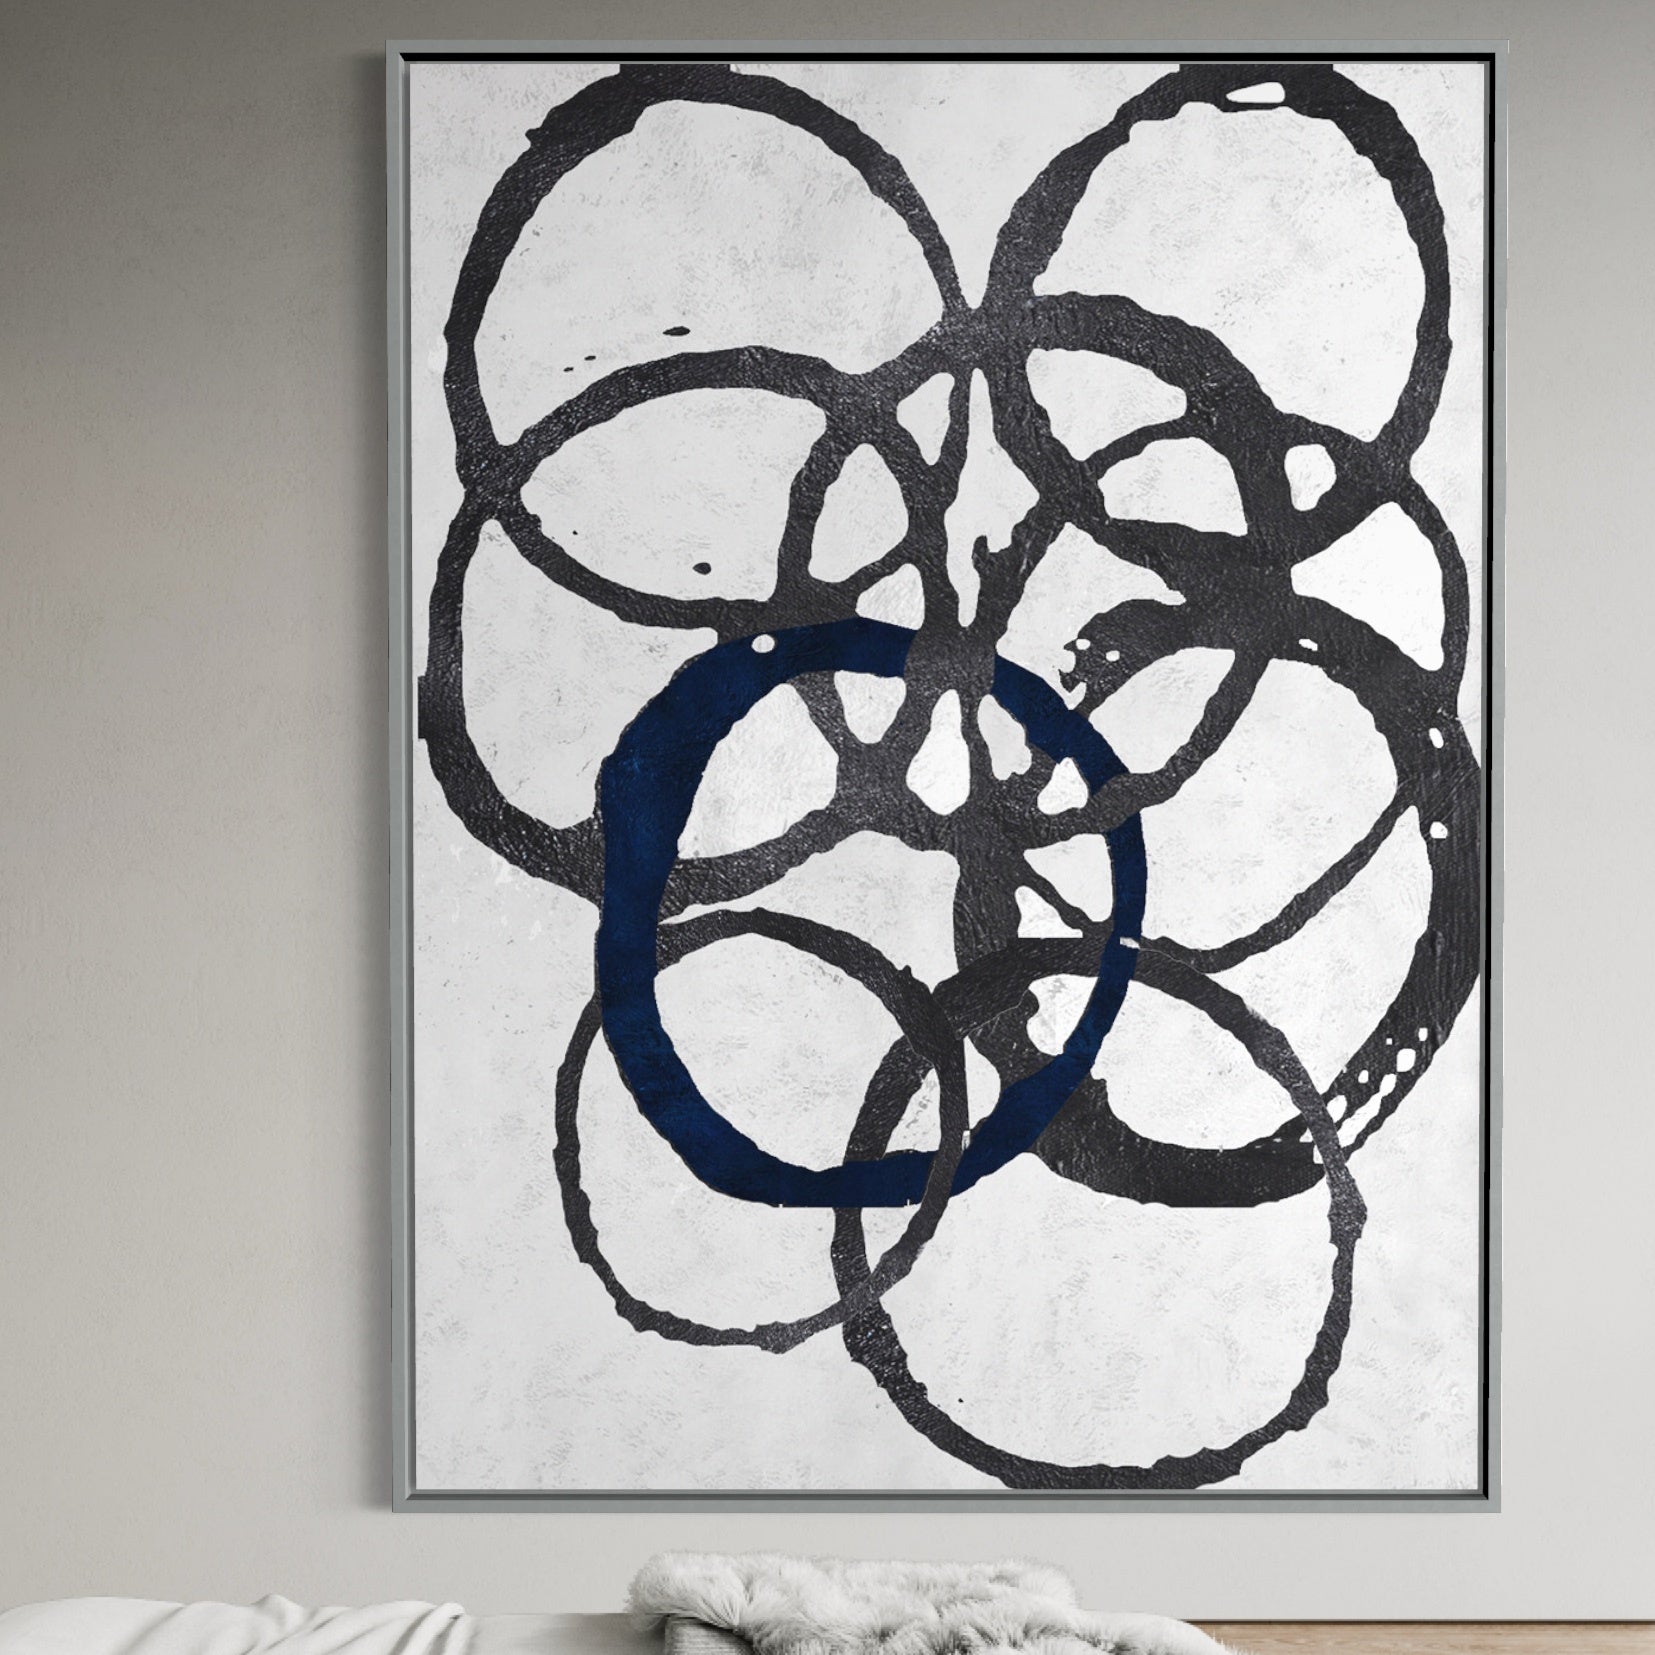 Circles And Charcoal, Gallery Wrap (No Bleed) / 75x100cm